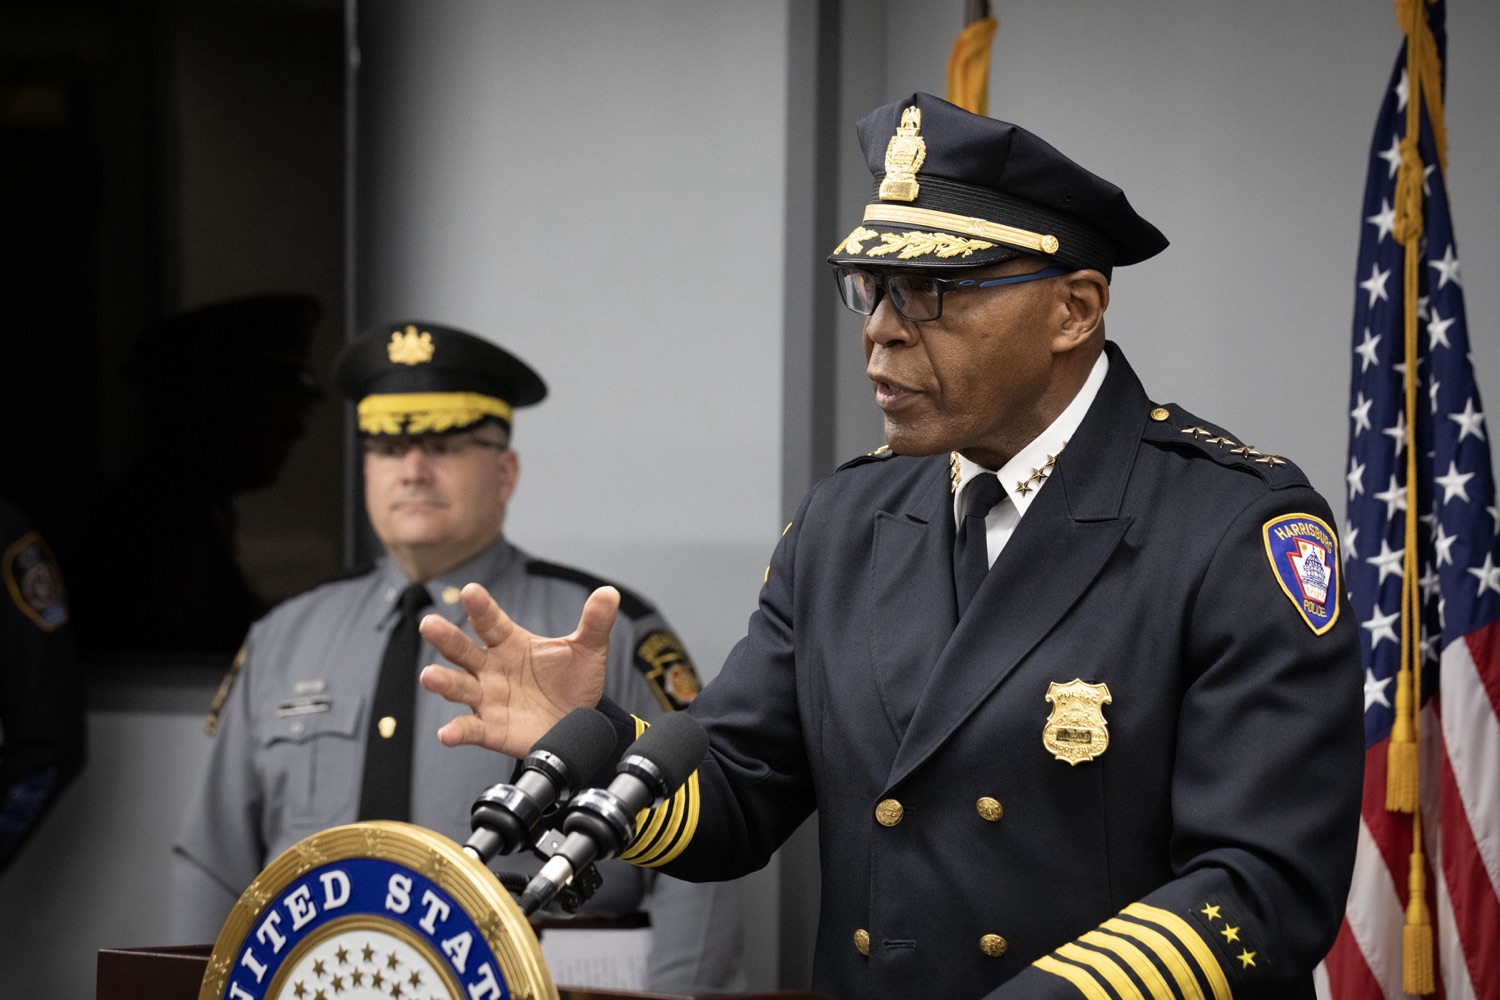 Senator Bob Casey visited Pennsylvania State Police Headquarters to discuss his proposed Stop Fentanyl at the Border Act. Pictured here is Harrisburg Chief Carter delivering remarks during the event. Harrisburg, Pennsylvania.<br><a href="https://filesource.amperwave.net/commonwealthofpa/photo/24347_psp_stopFentanyl_JP_16.jpg" target="_blank">⇣ Download Photo</a>